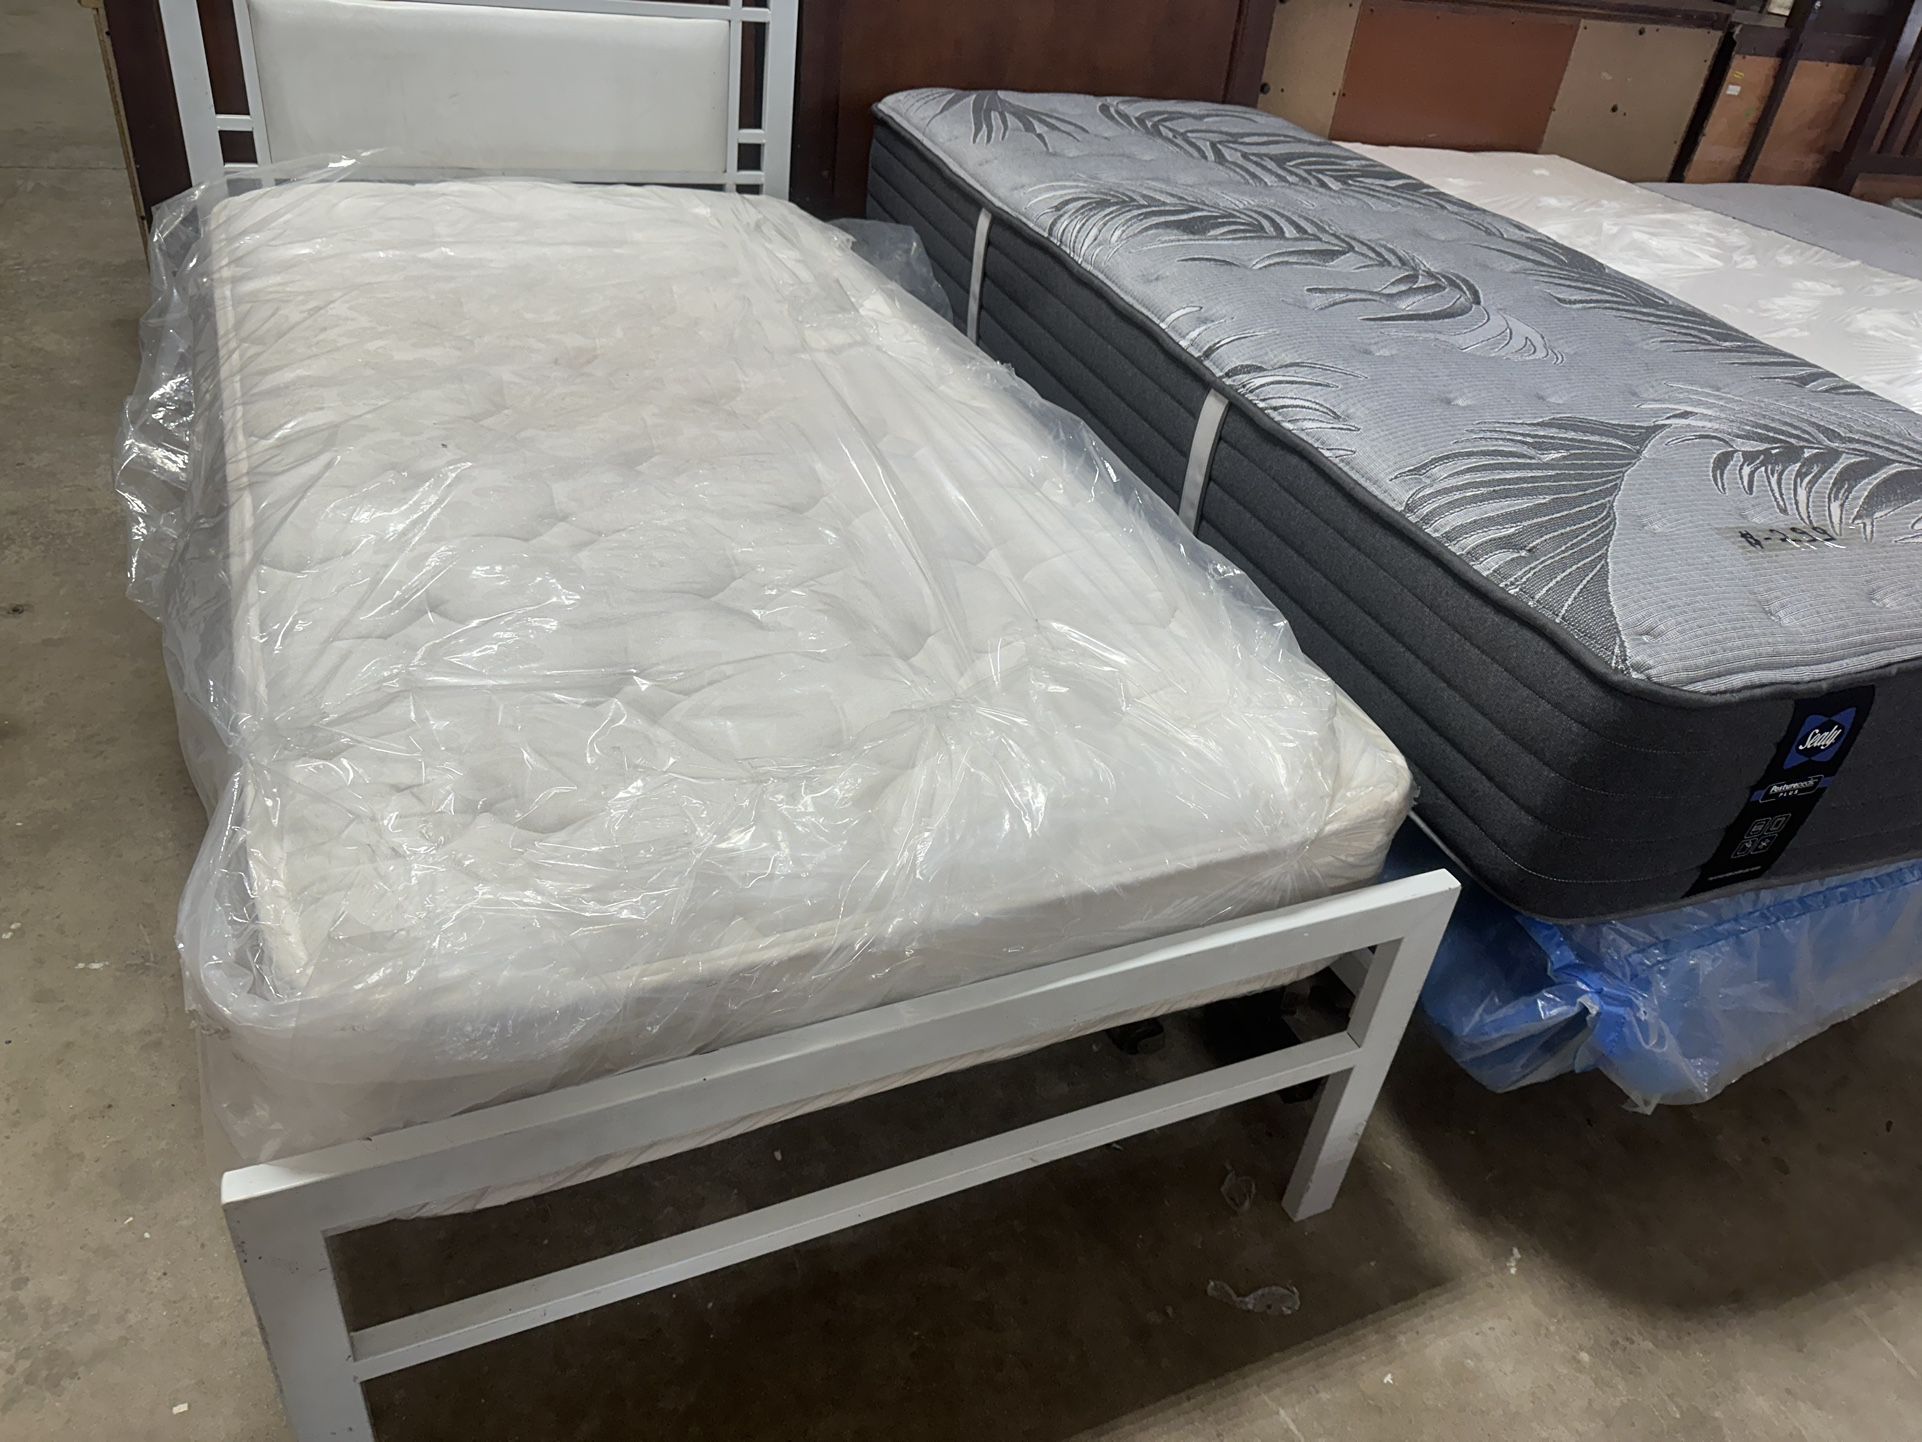 Twin size mattress, and bed